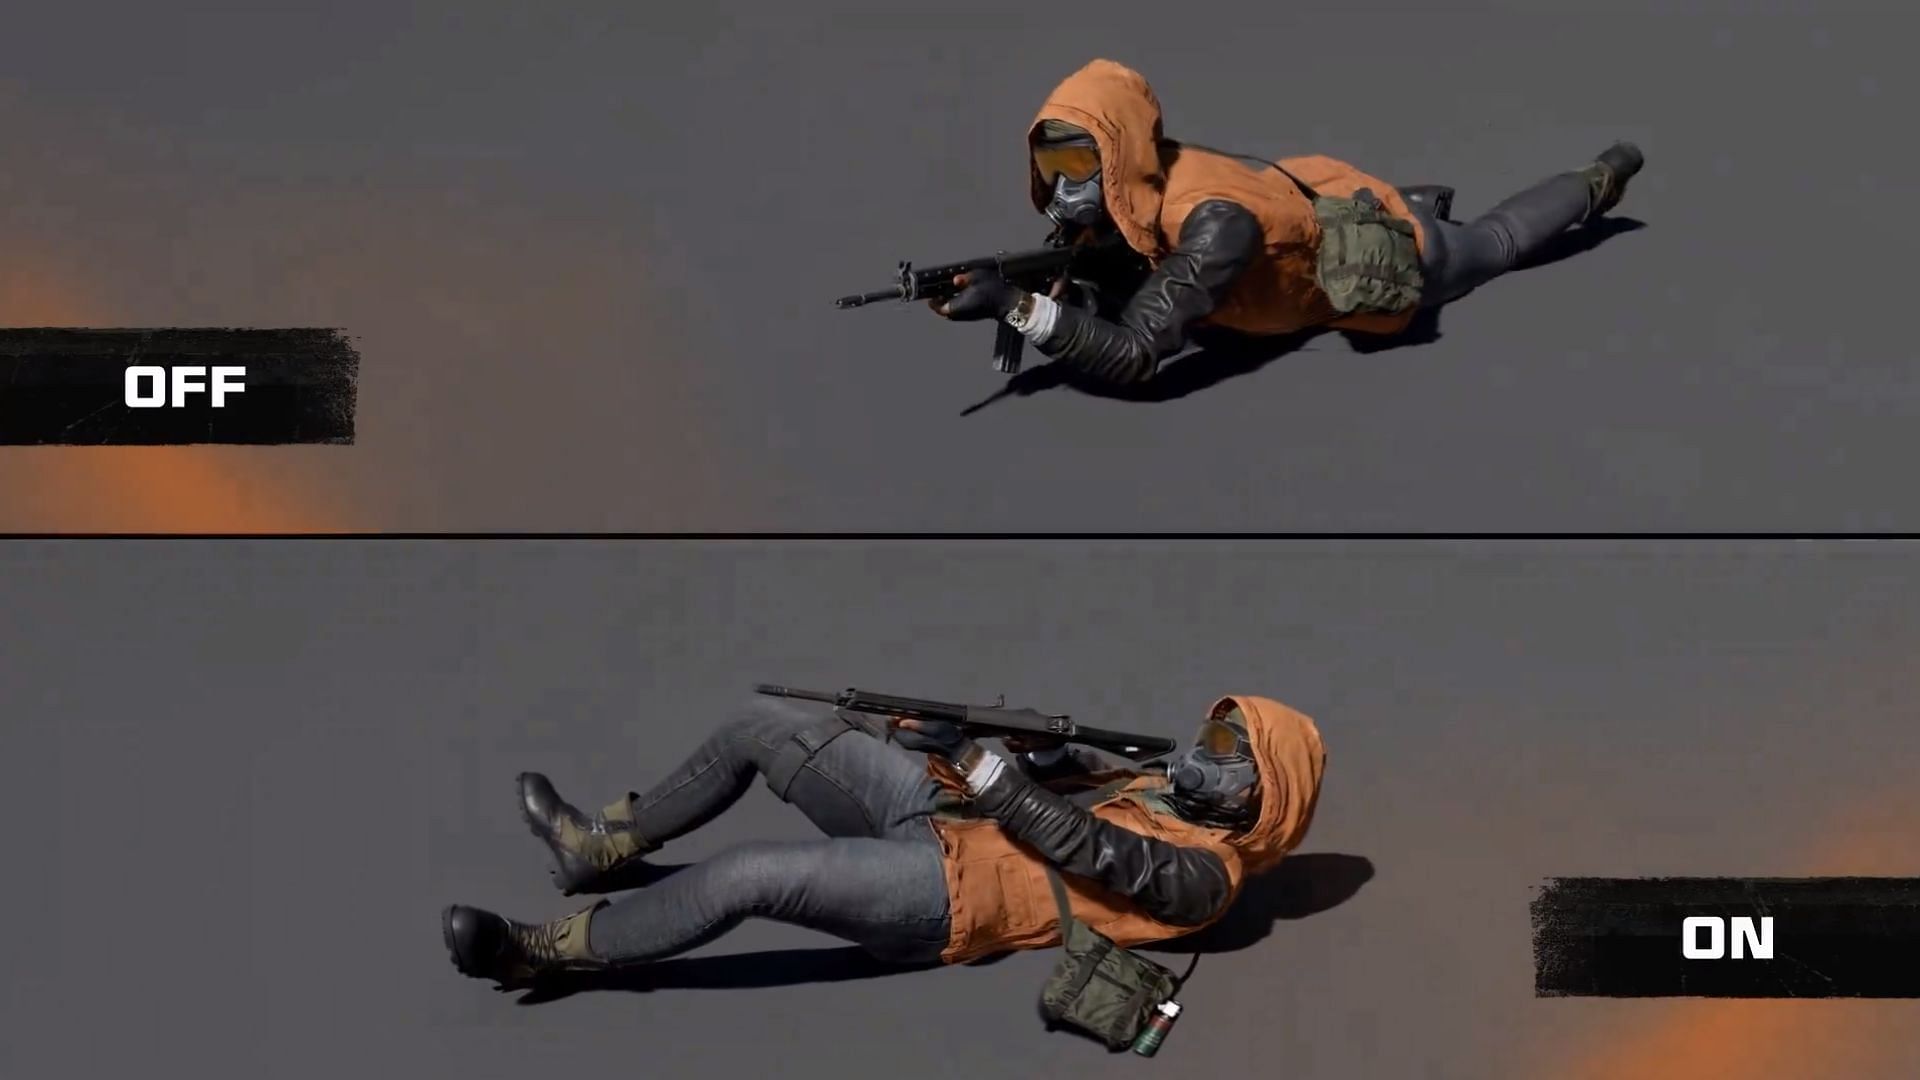 Supine prone is a part of the Omnimovement mechanic in Black Ops 6 (Image via Activision)